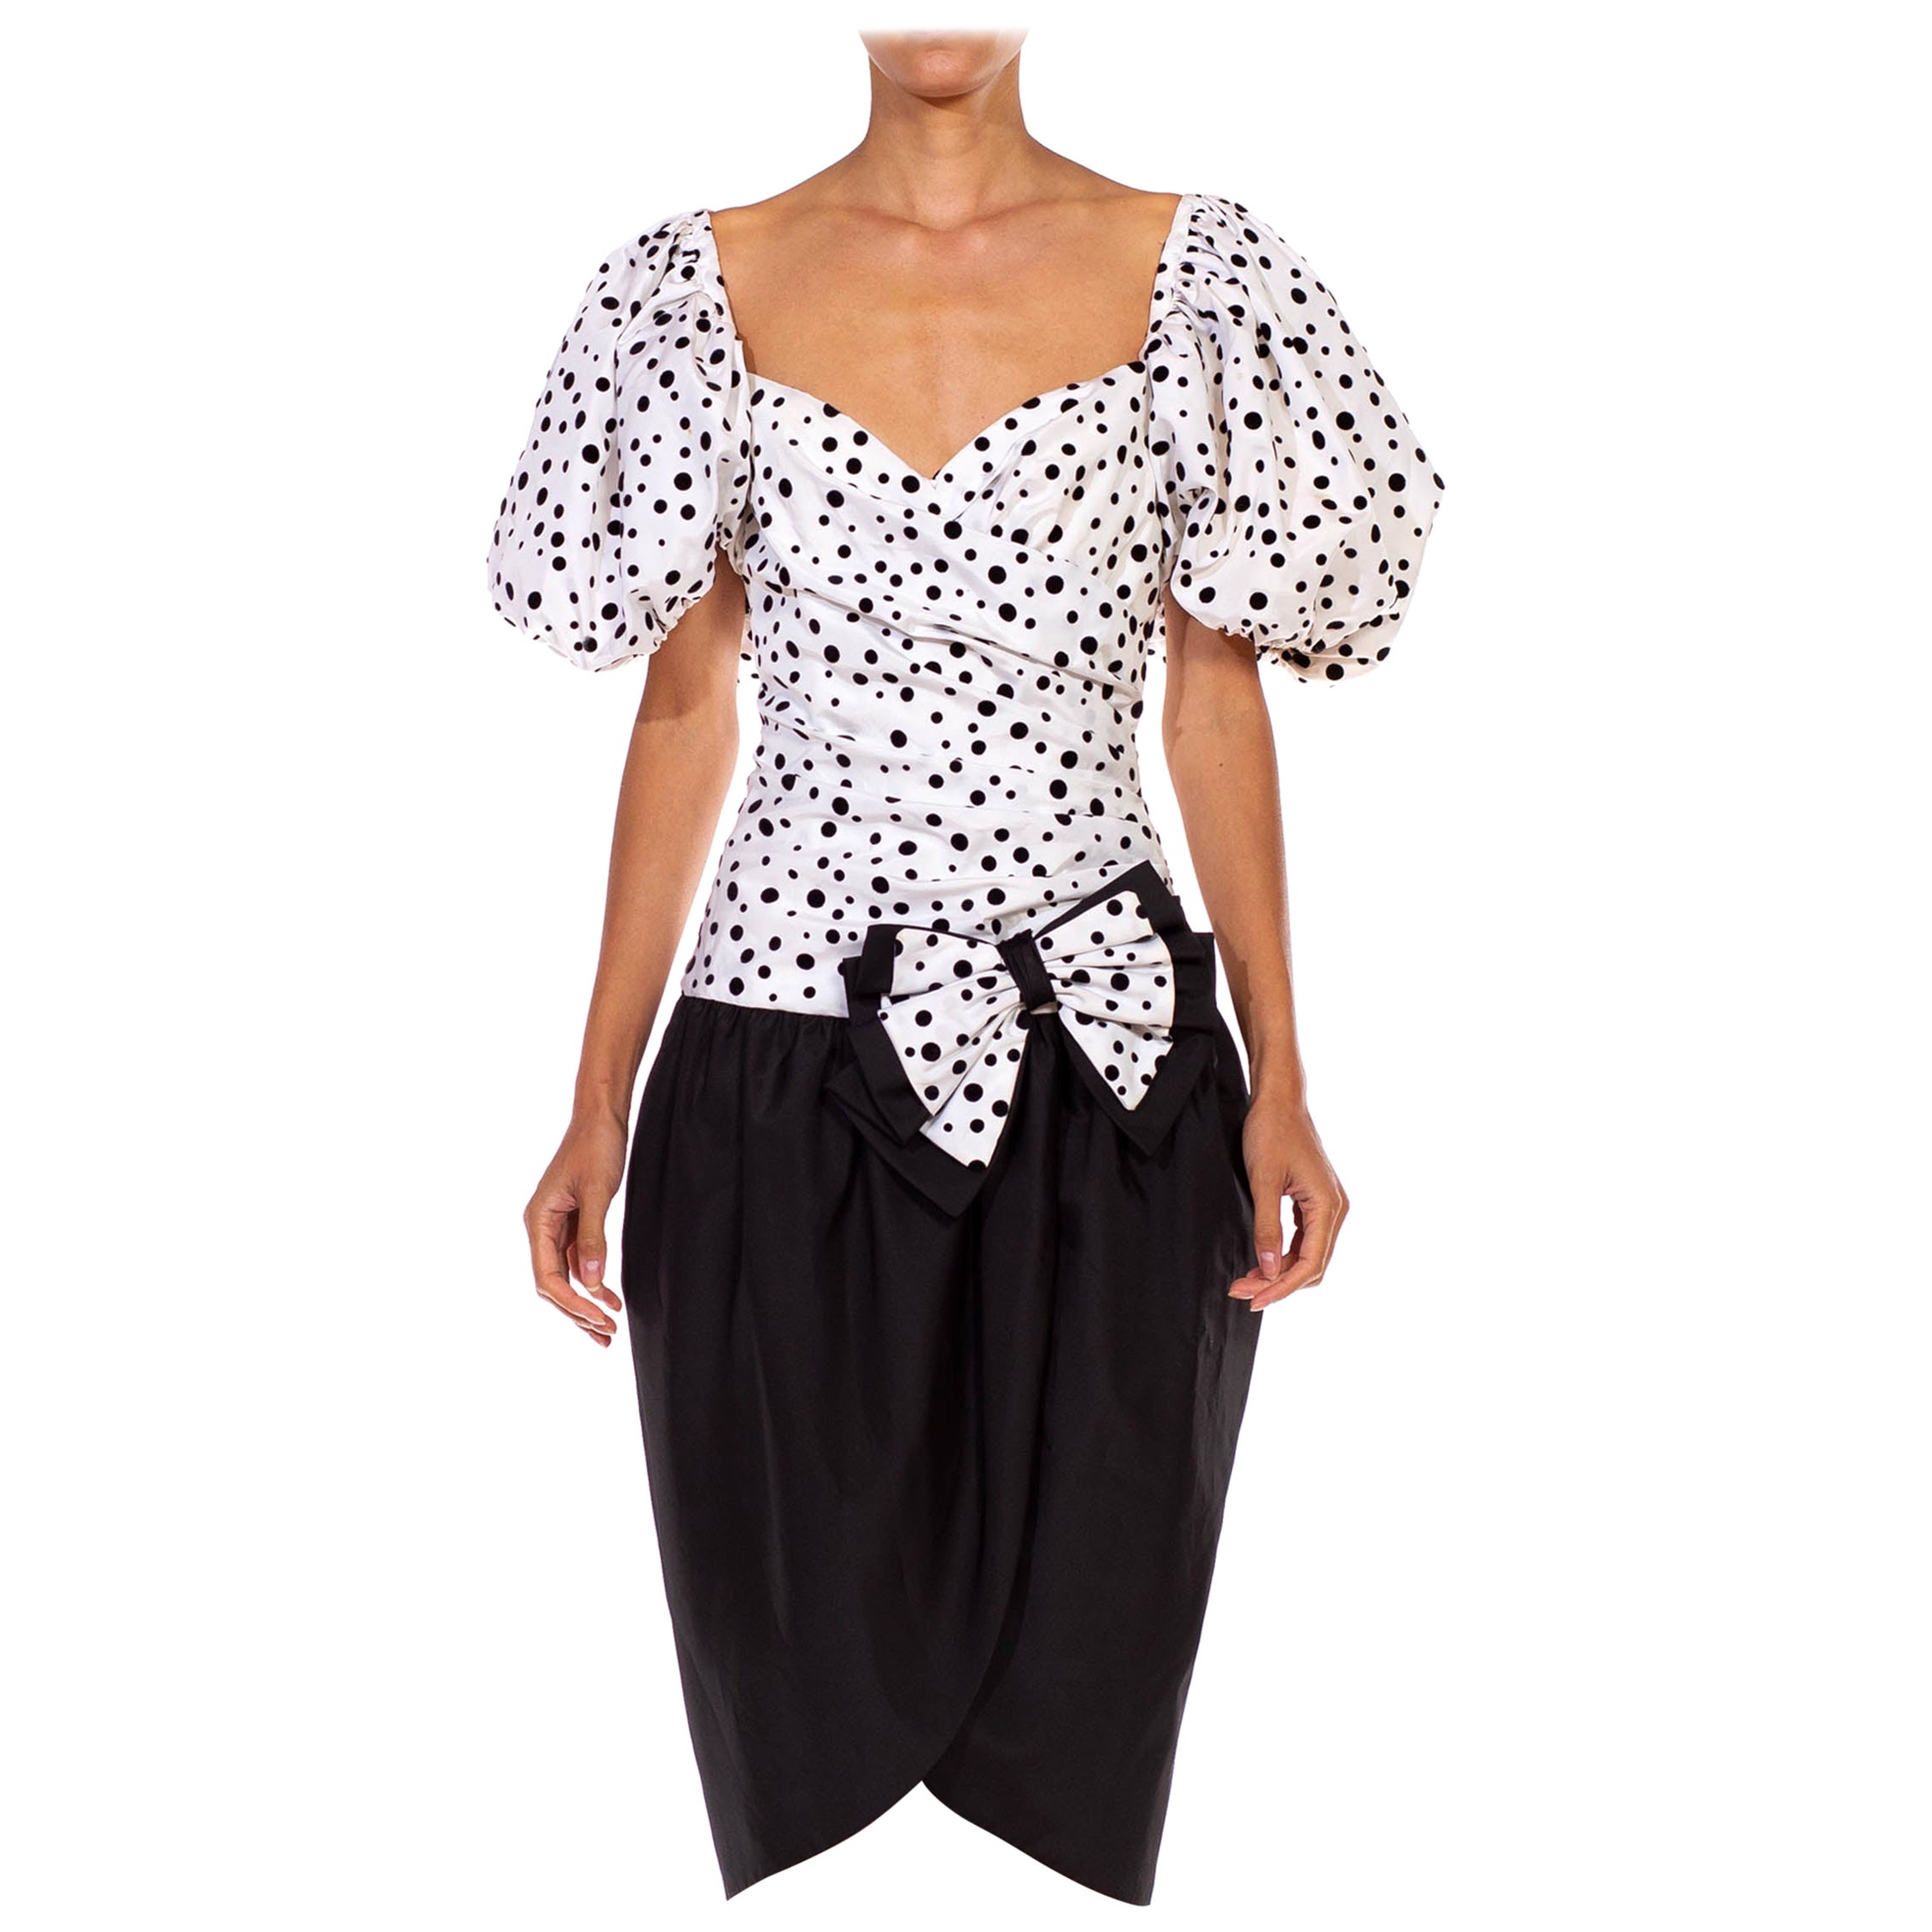 1980S Black & White Polka Dot Puff Sleeve Cocktail Dress With Large Bow